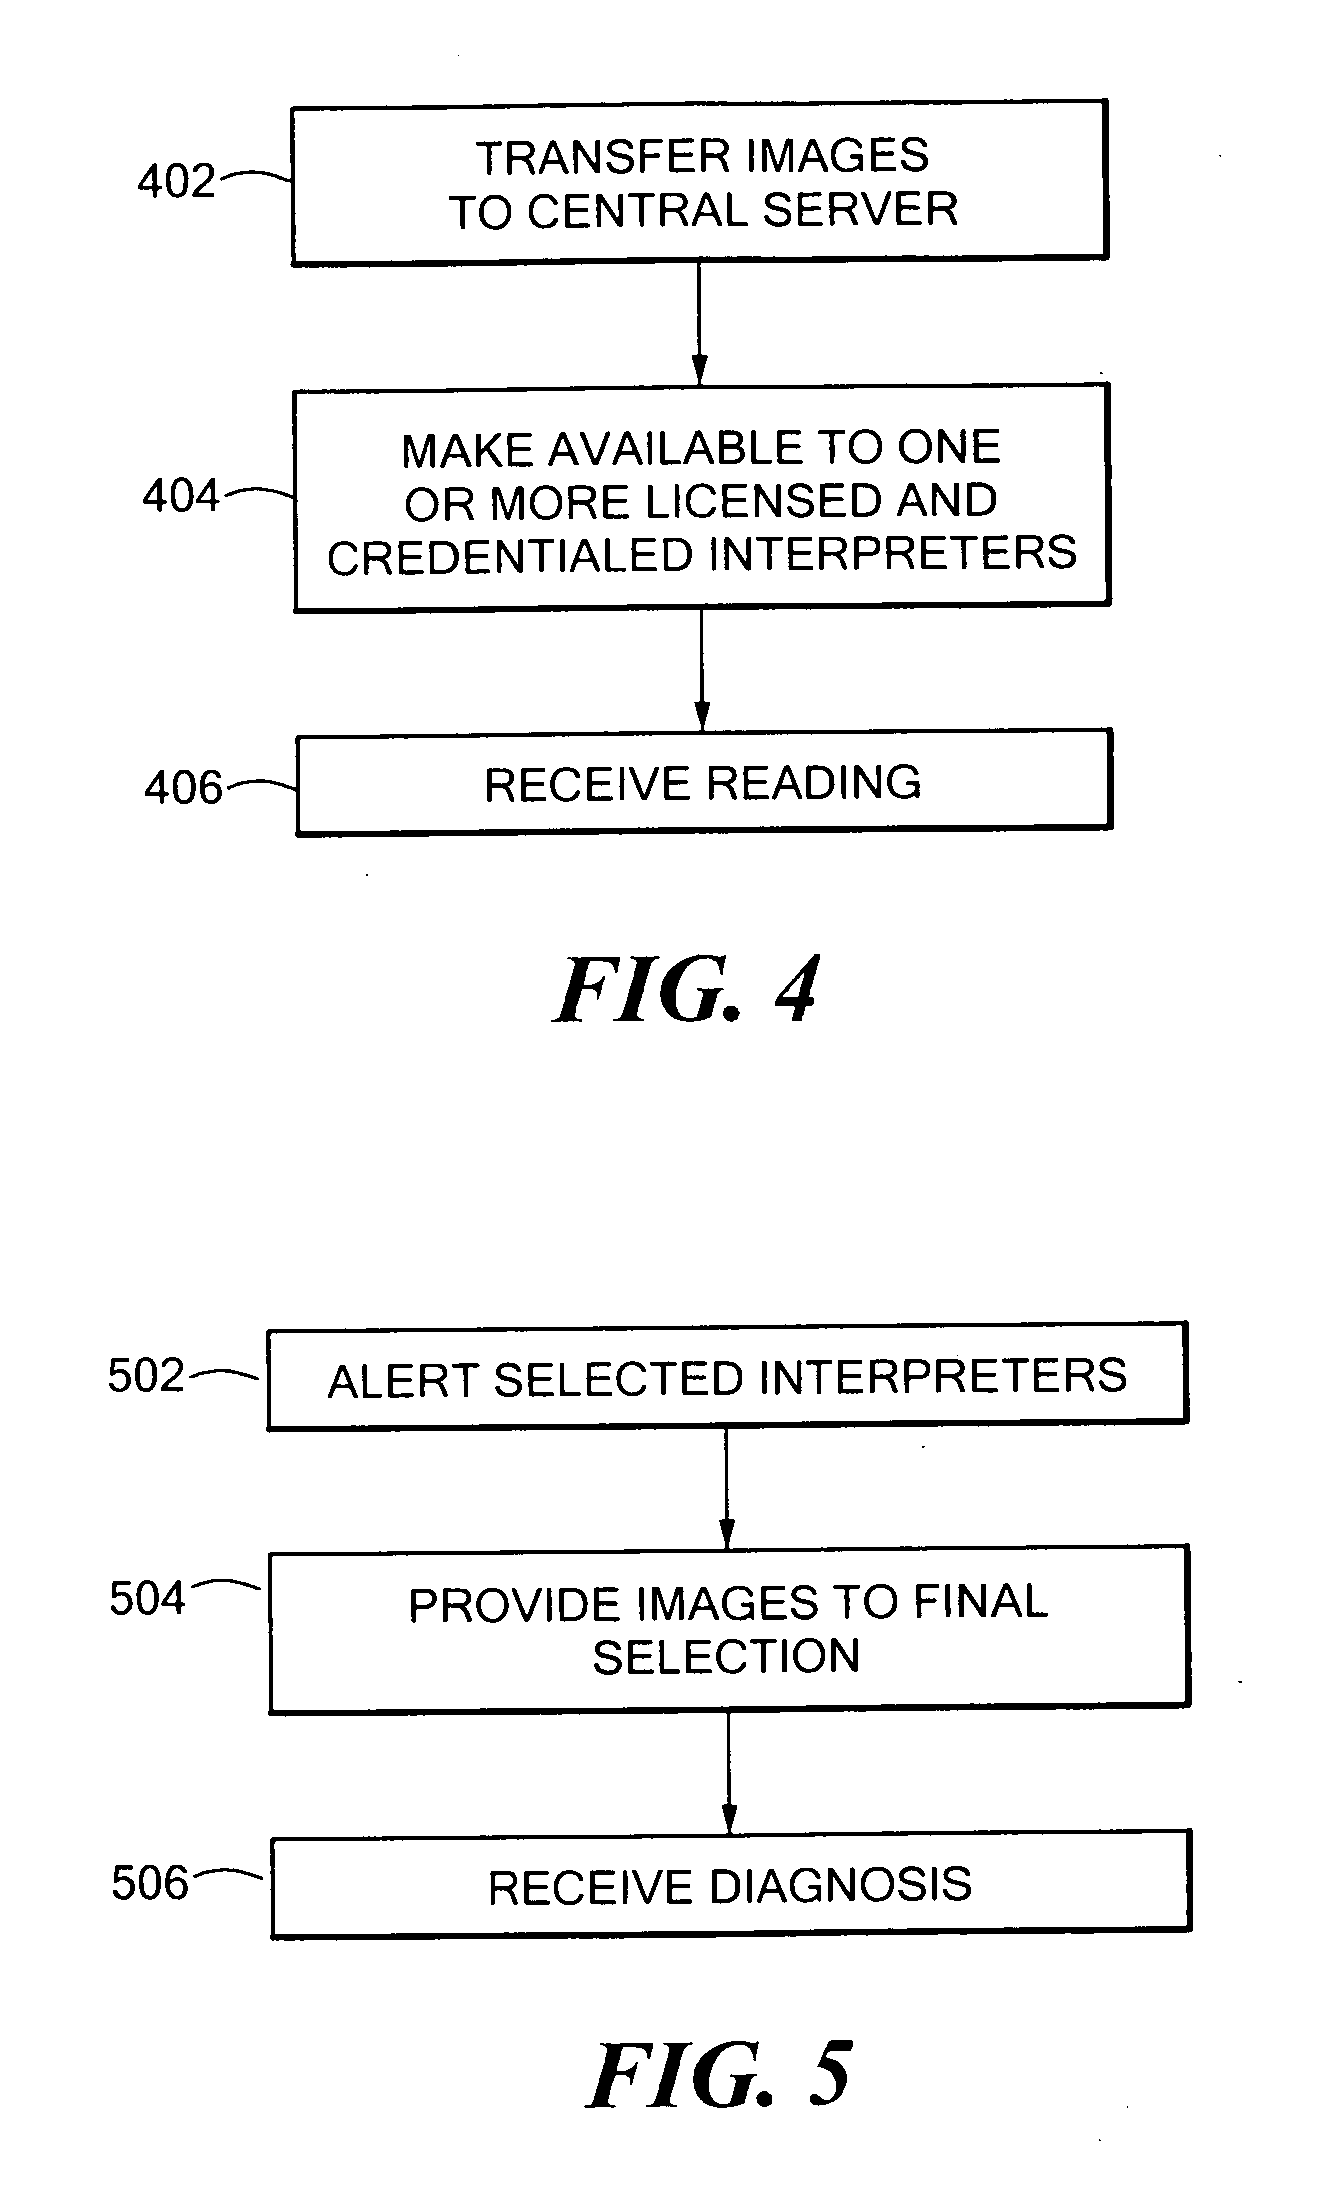 Systems and methods for providing diagnostic imaging studies to remote users